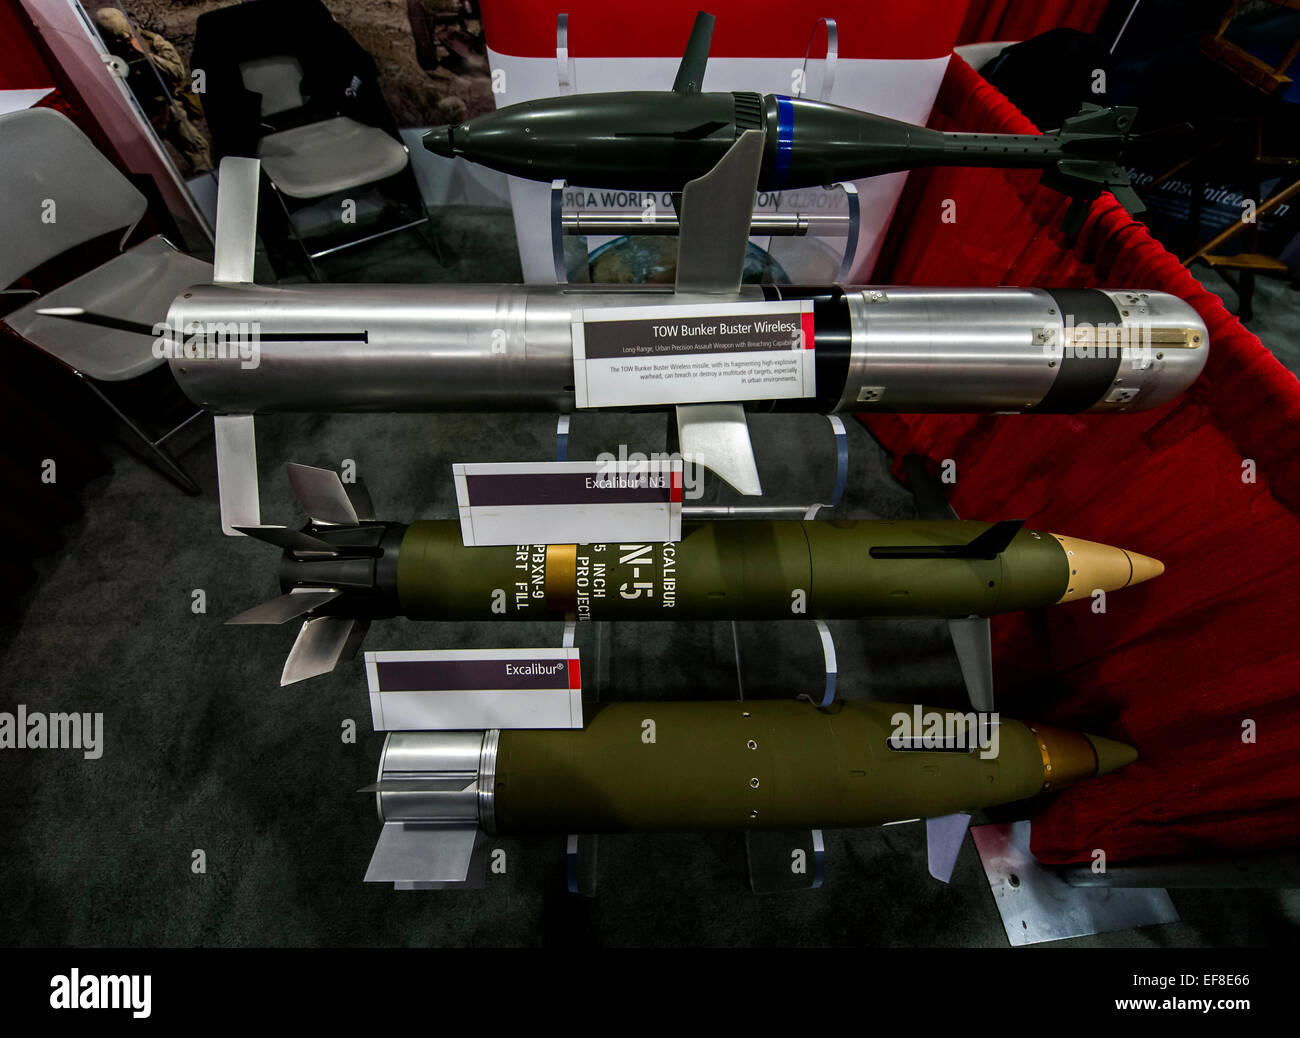 Camp Pendleton, California, USA. 28th Jan, 2015. Munitions by Raytheon are displayed during the Marine West Exposition at Camp Pendleton's Pacific Views Events Center. Founded in 1992, Marine West showcases the latest technologies and prototypes in military hardware for Marines and other military and civilian personnel. © Brian Cahn/ZUMA Wire/Alamy Live News Stock Photo